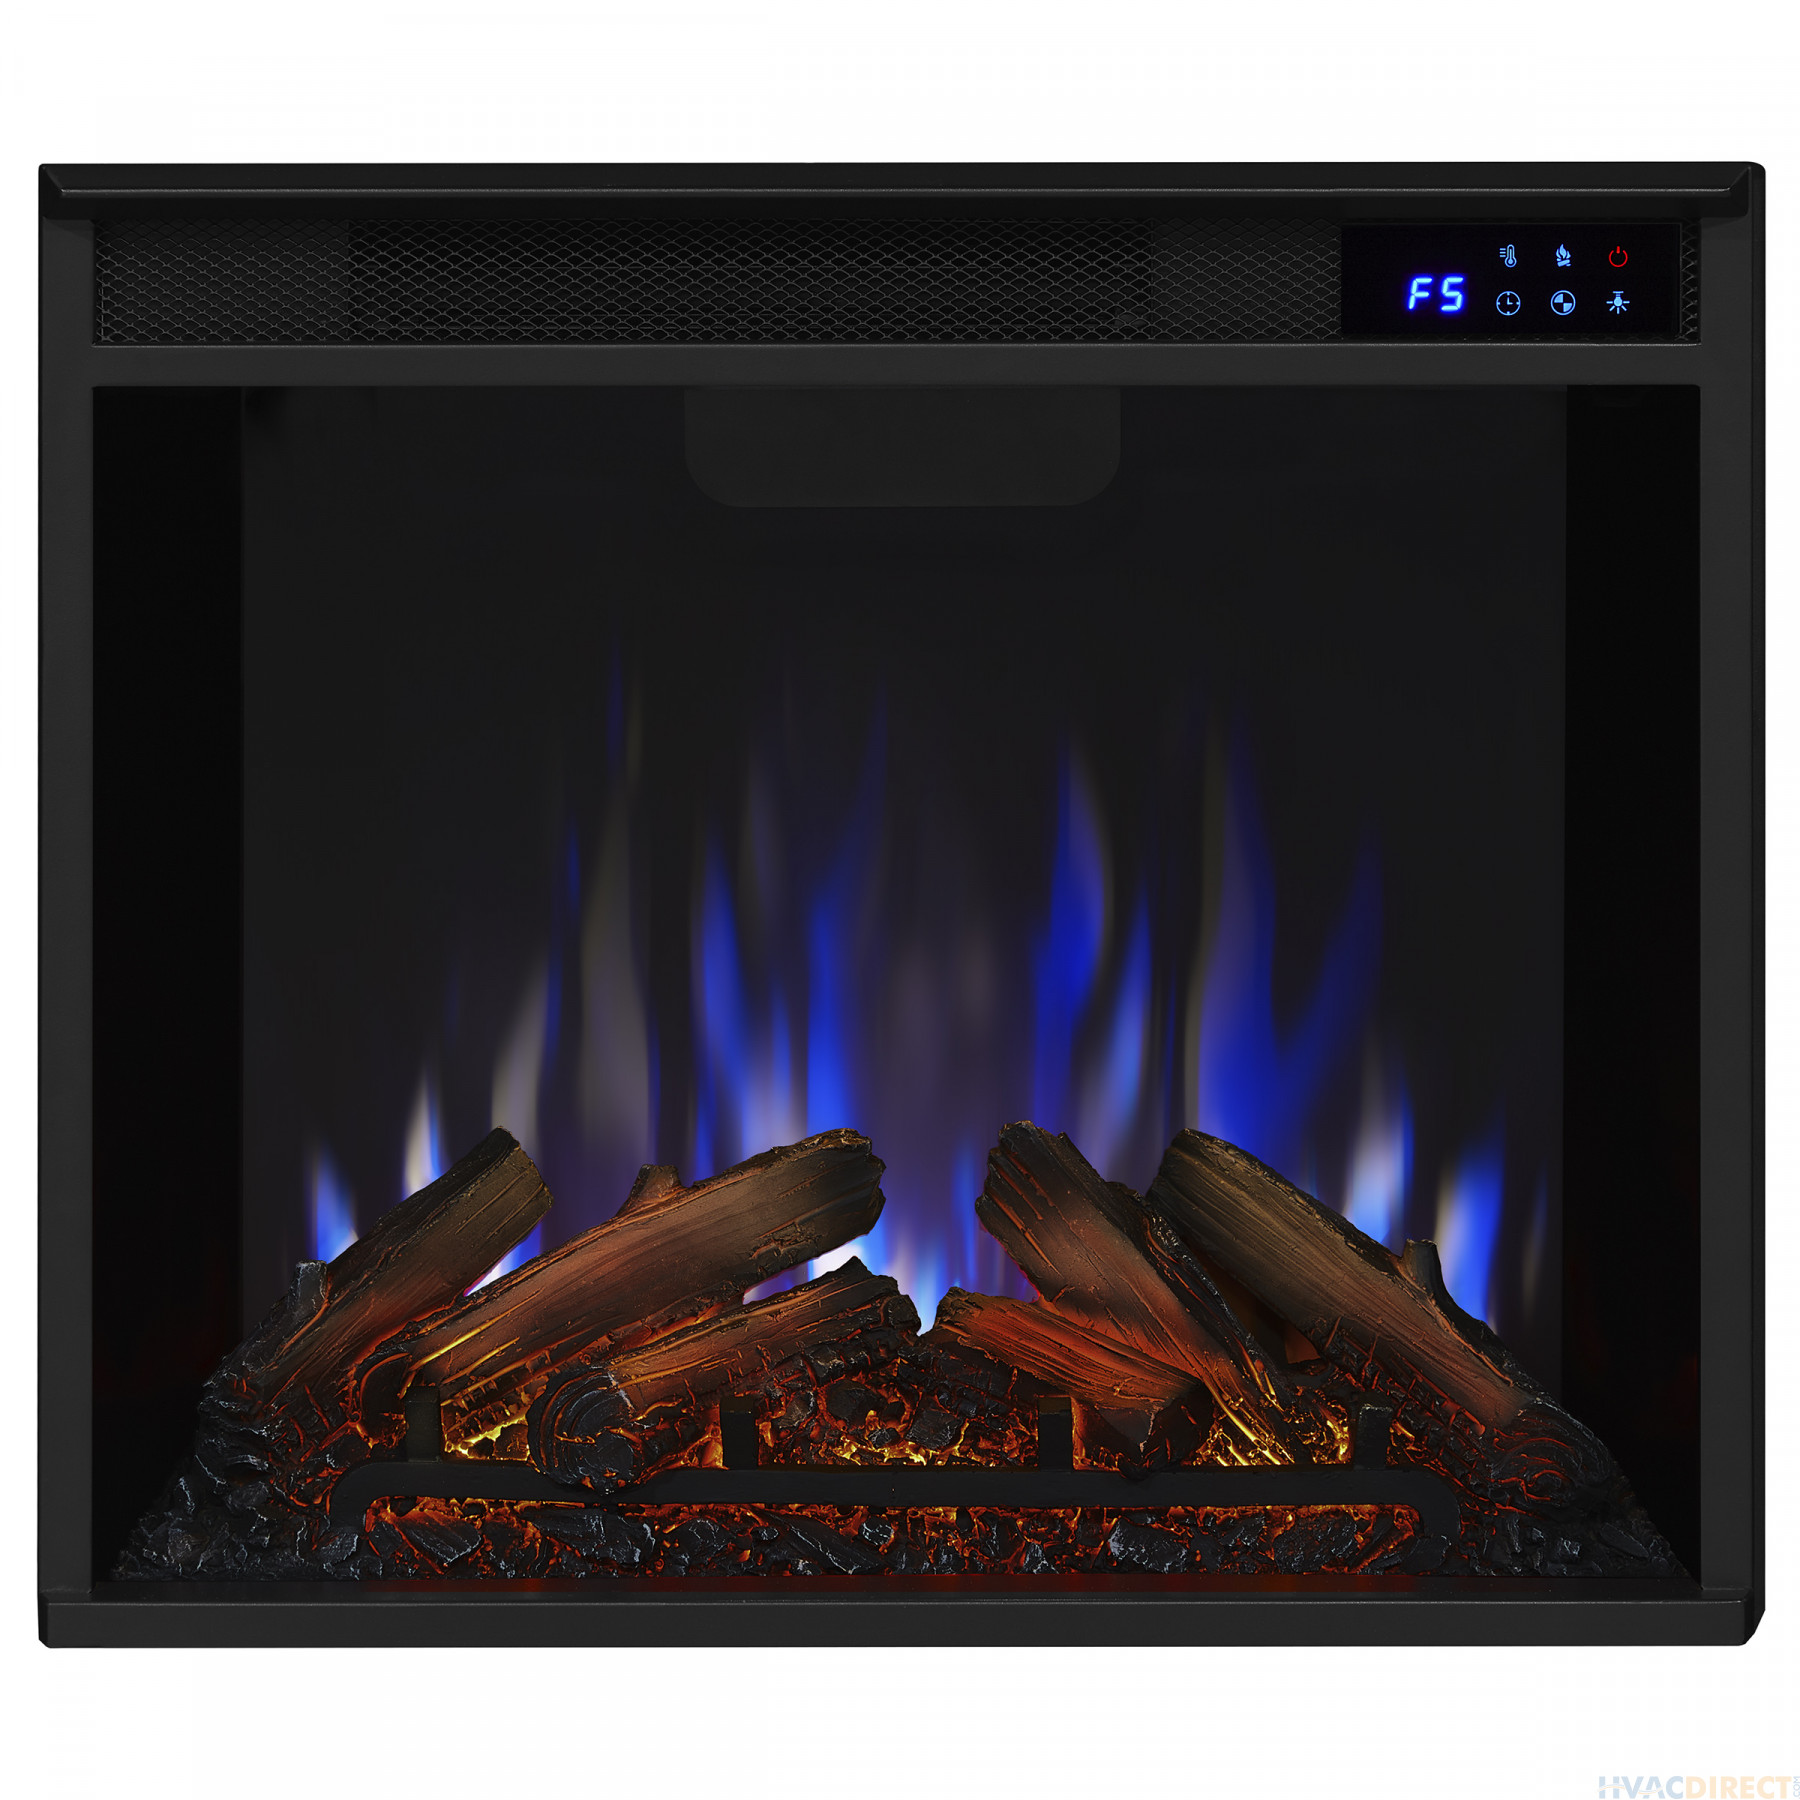 Real Flame Electric Firebox - 4199